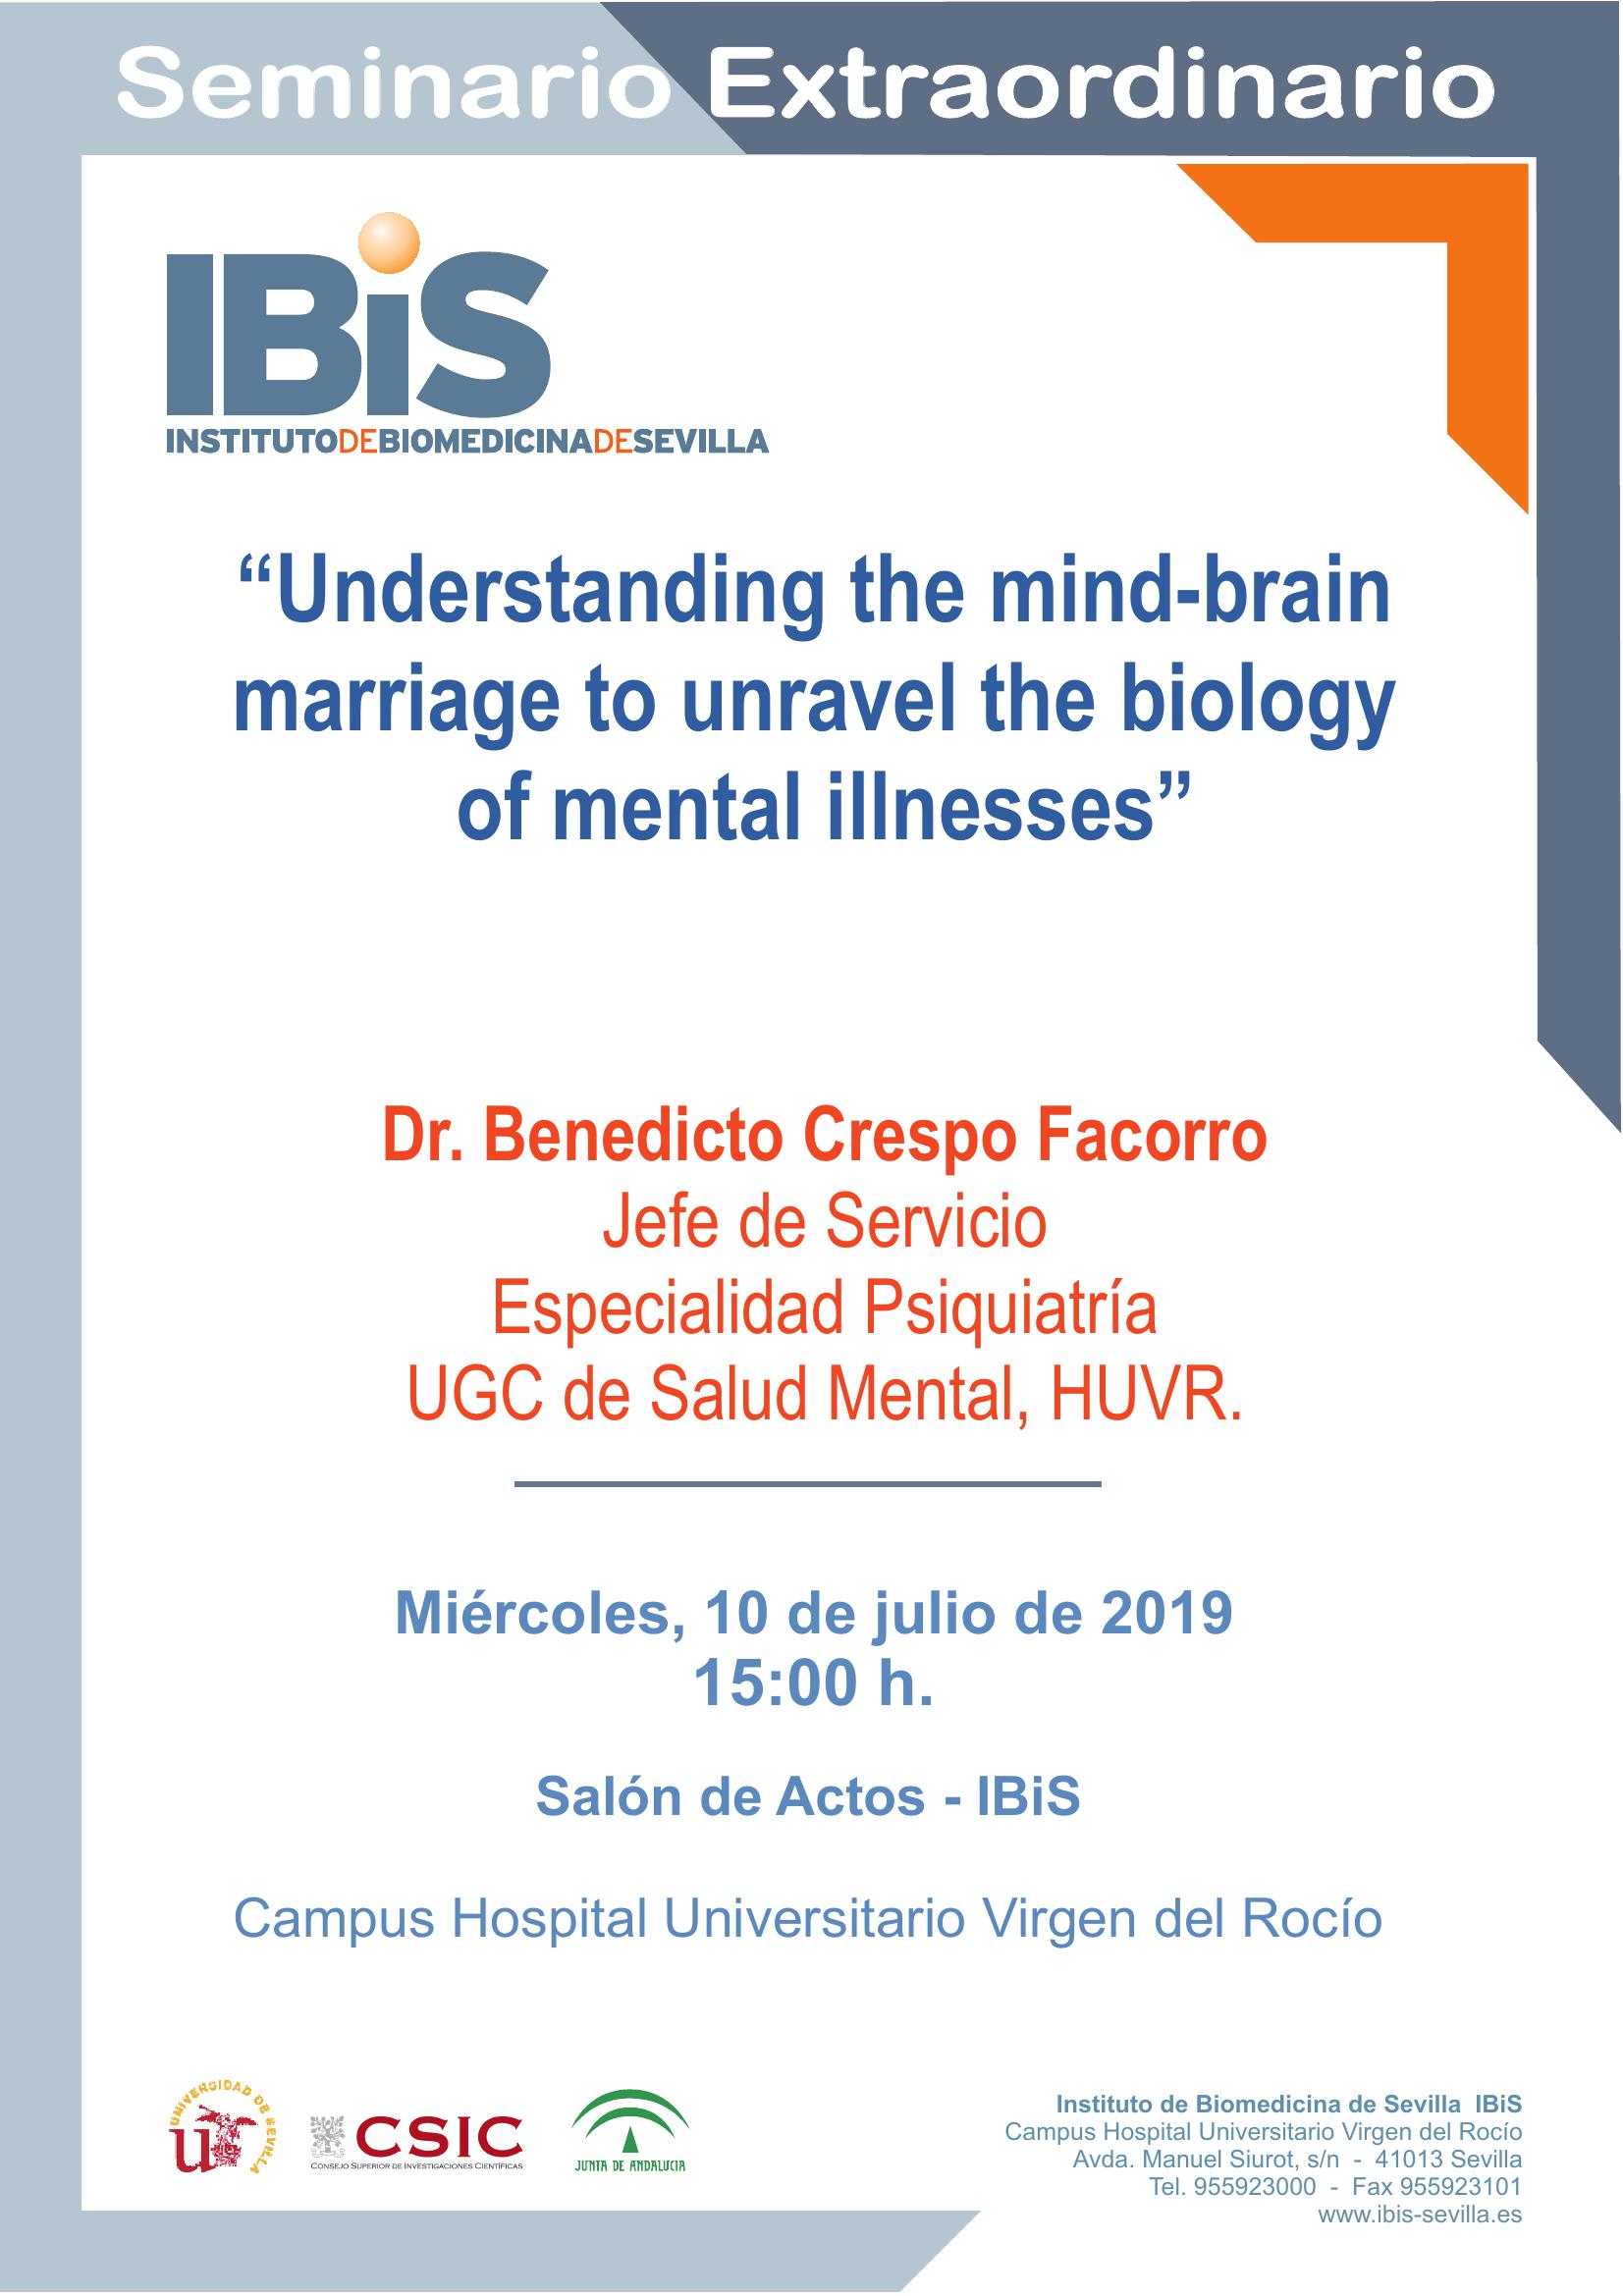 Poster: “Understanding the mind-brain marriage to unravel the biology of mental illnesses”